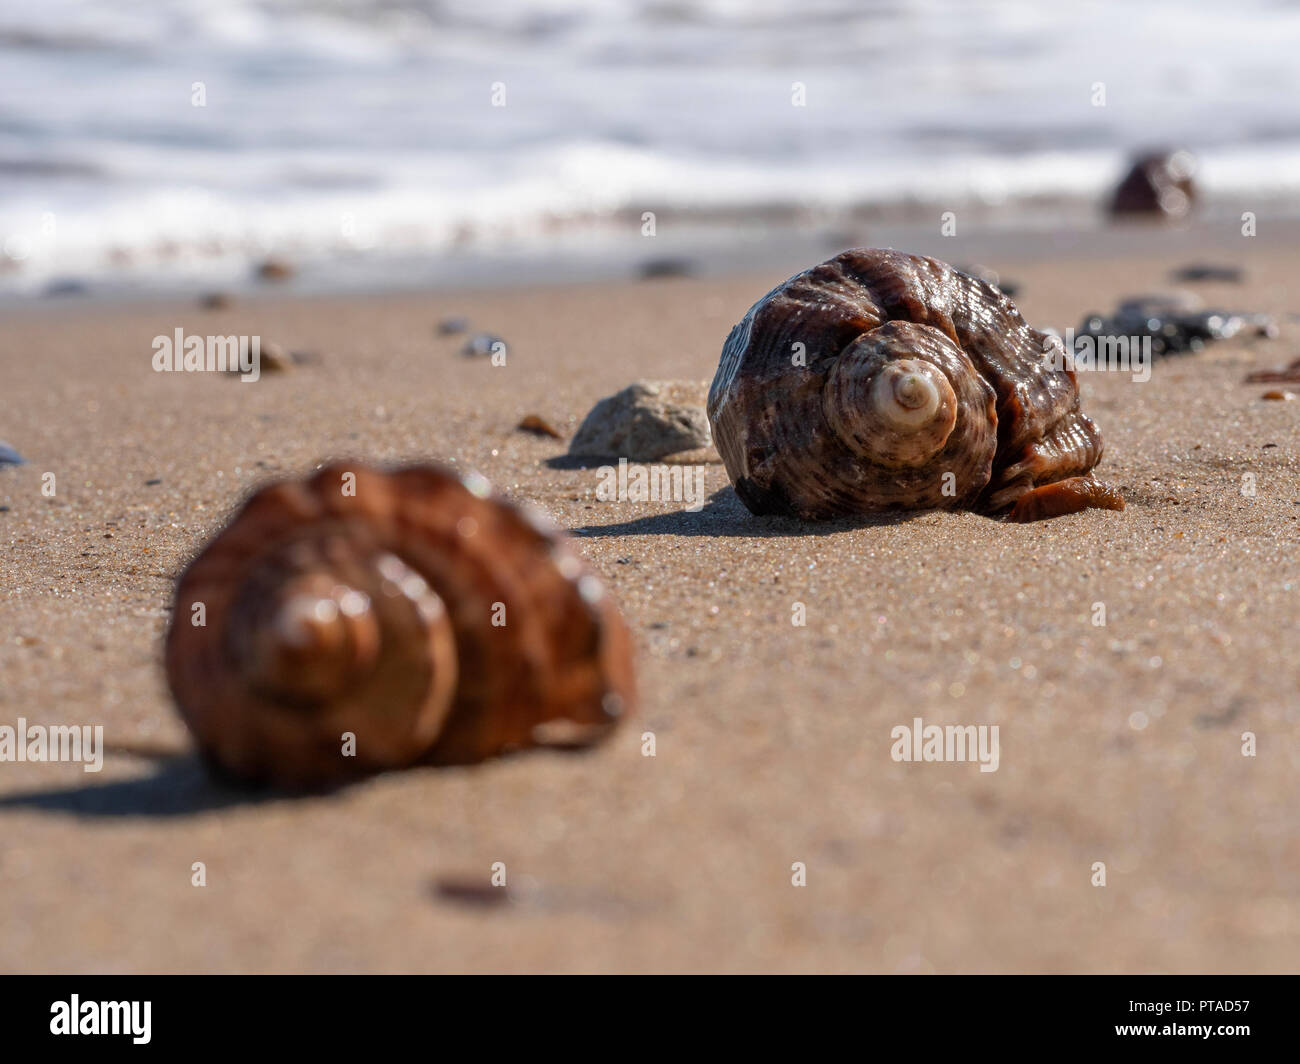 Two empty shells of rapana mollusk on a sandy beach with a surf wave and some stones visible in the background Stock Photo